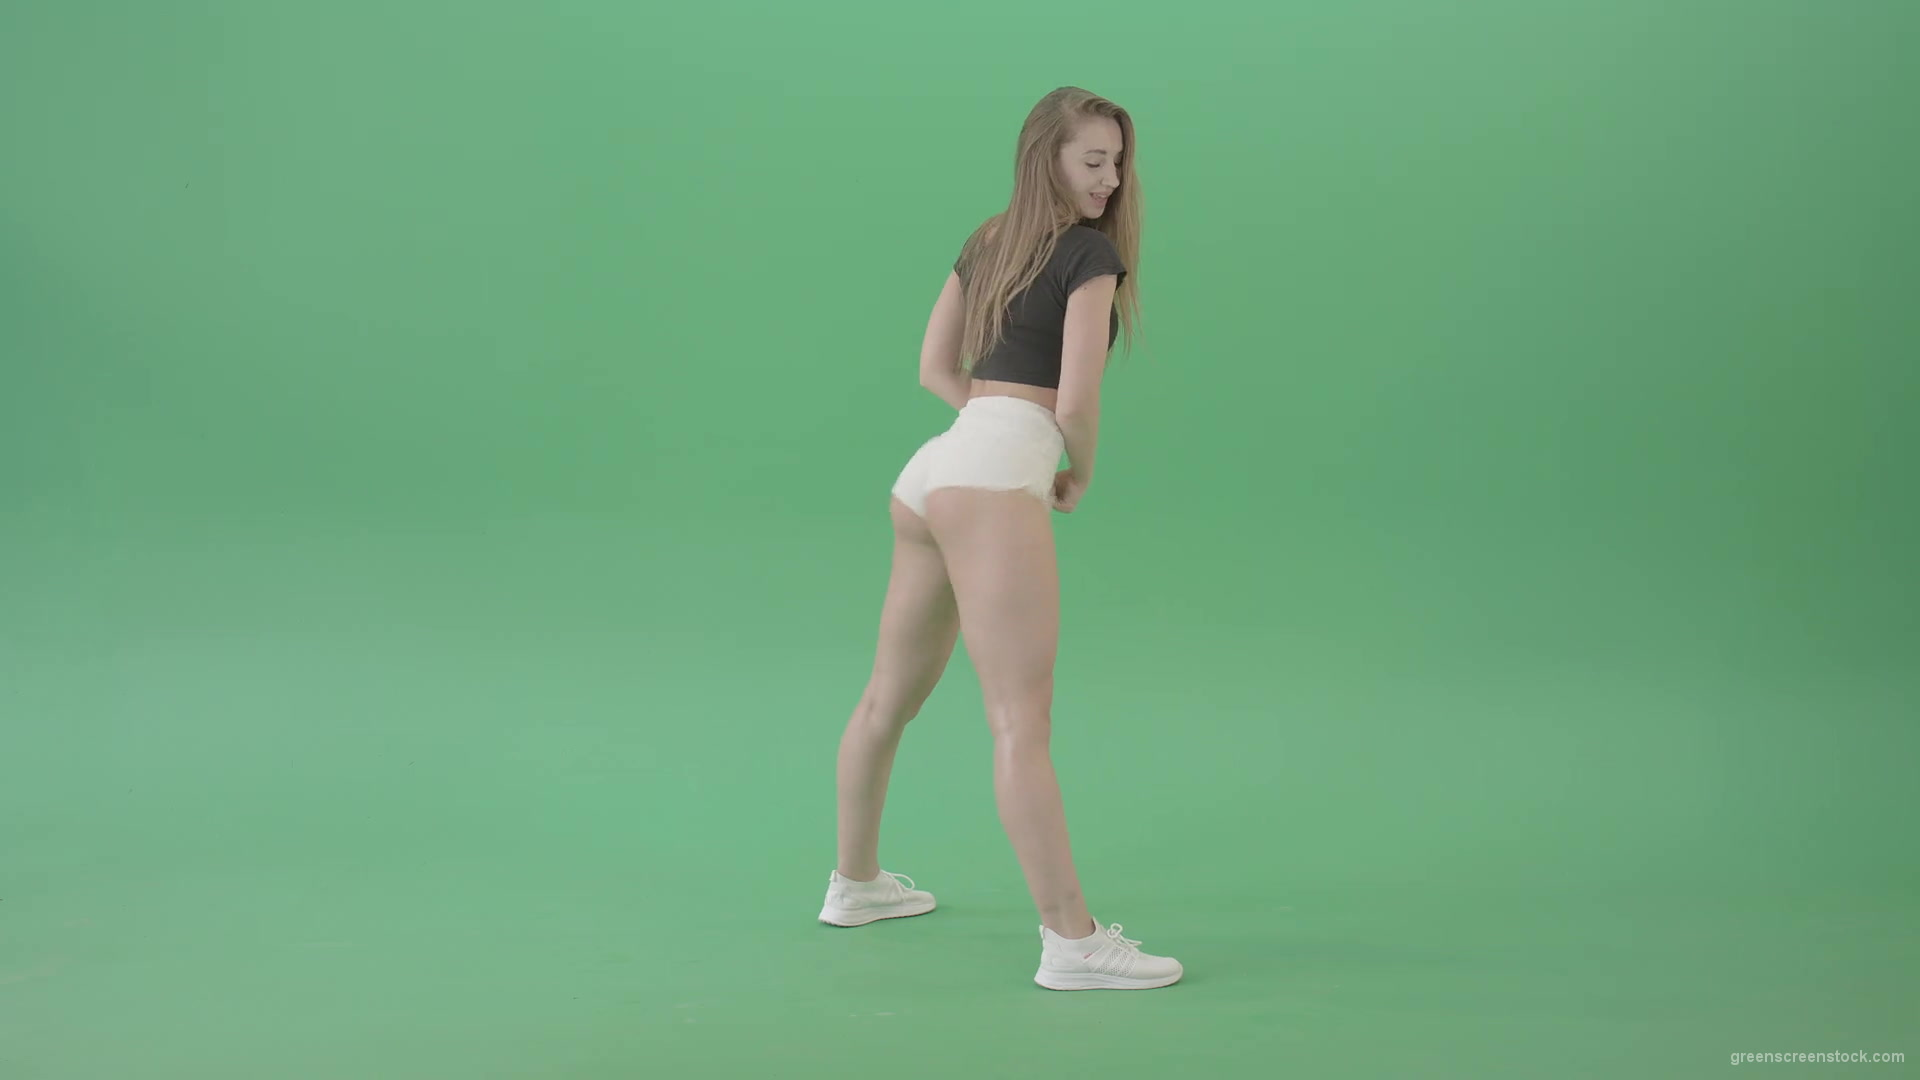 Amazing-young-woman-shaking-ass-in-side-view-twerking-dance-over-green-screen-4K-Video-Footage-1920_007 Green Screen Stock